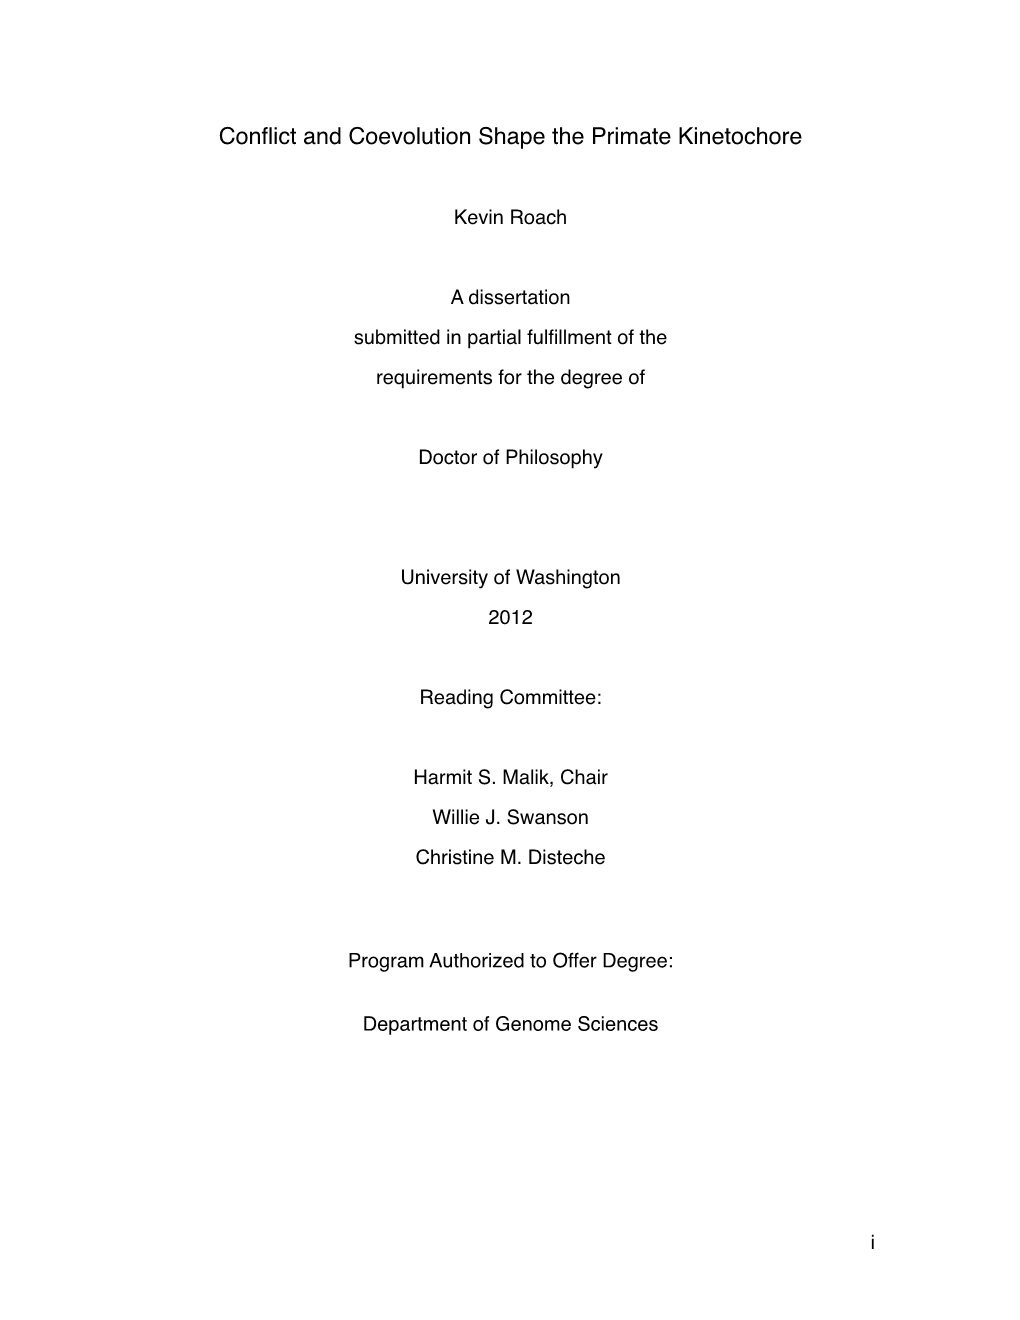 Kevin Roach Dissertation Submitted Copy